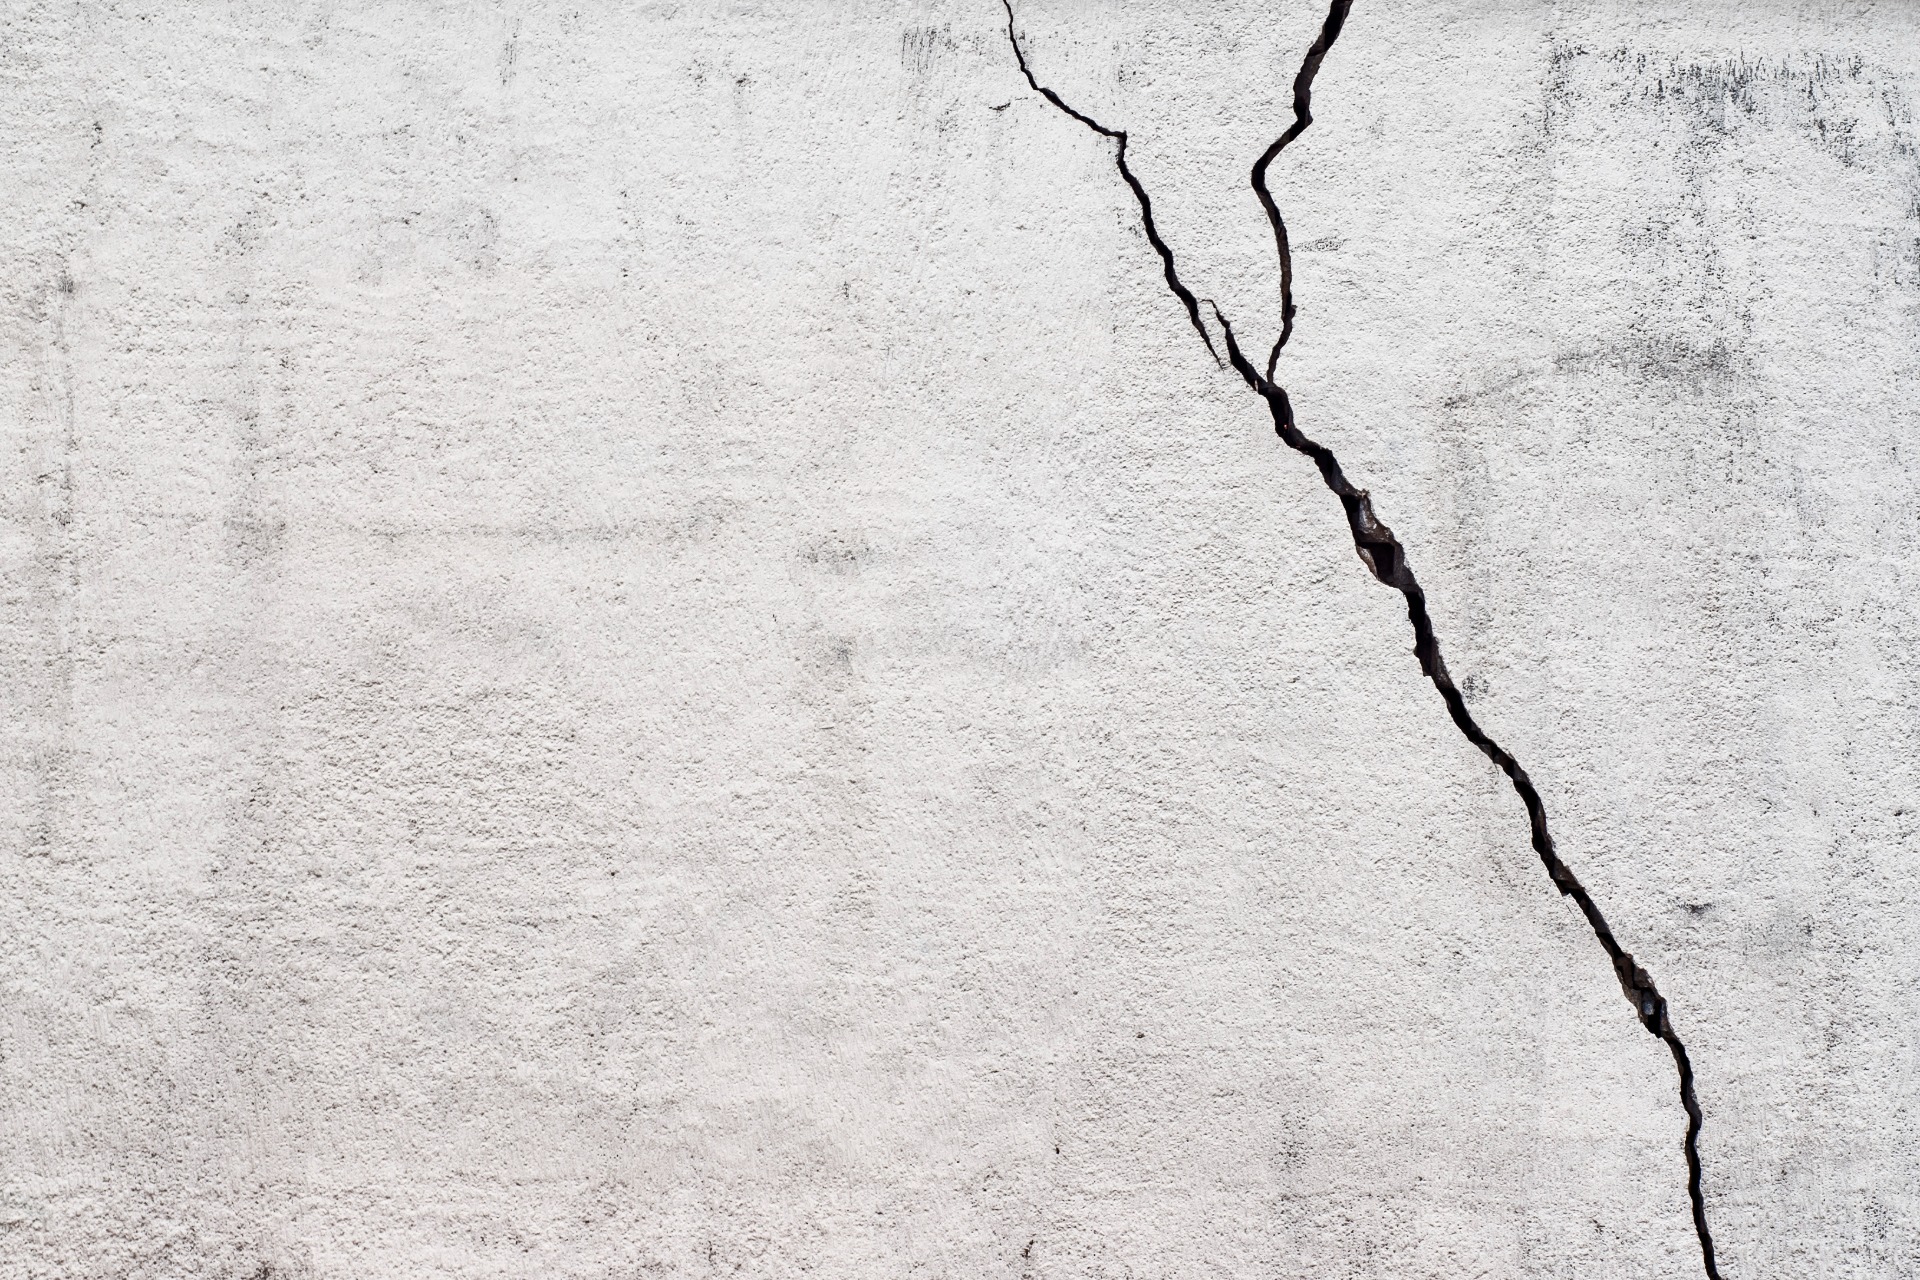 This is a photo of a large crack in a concrete surface.